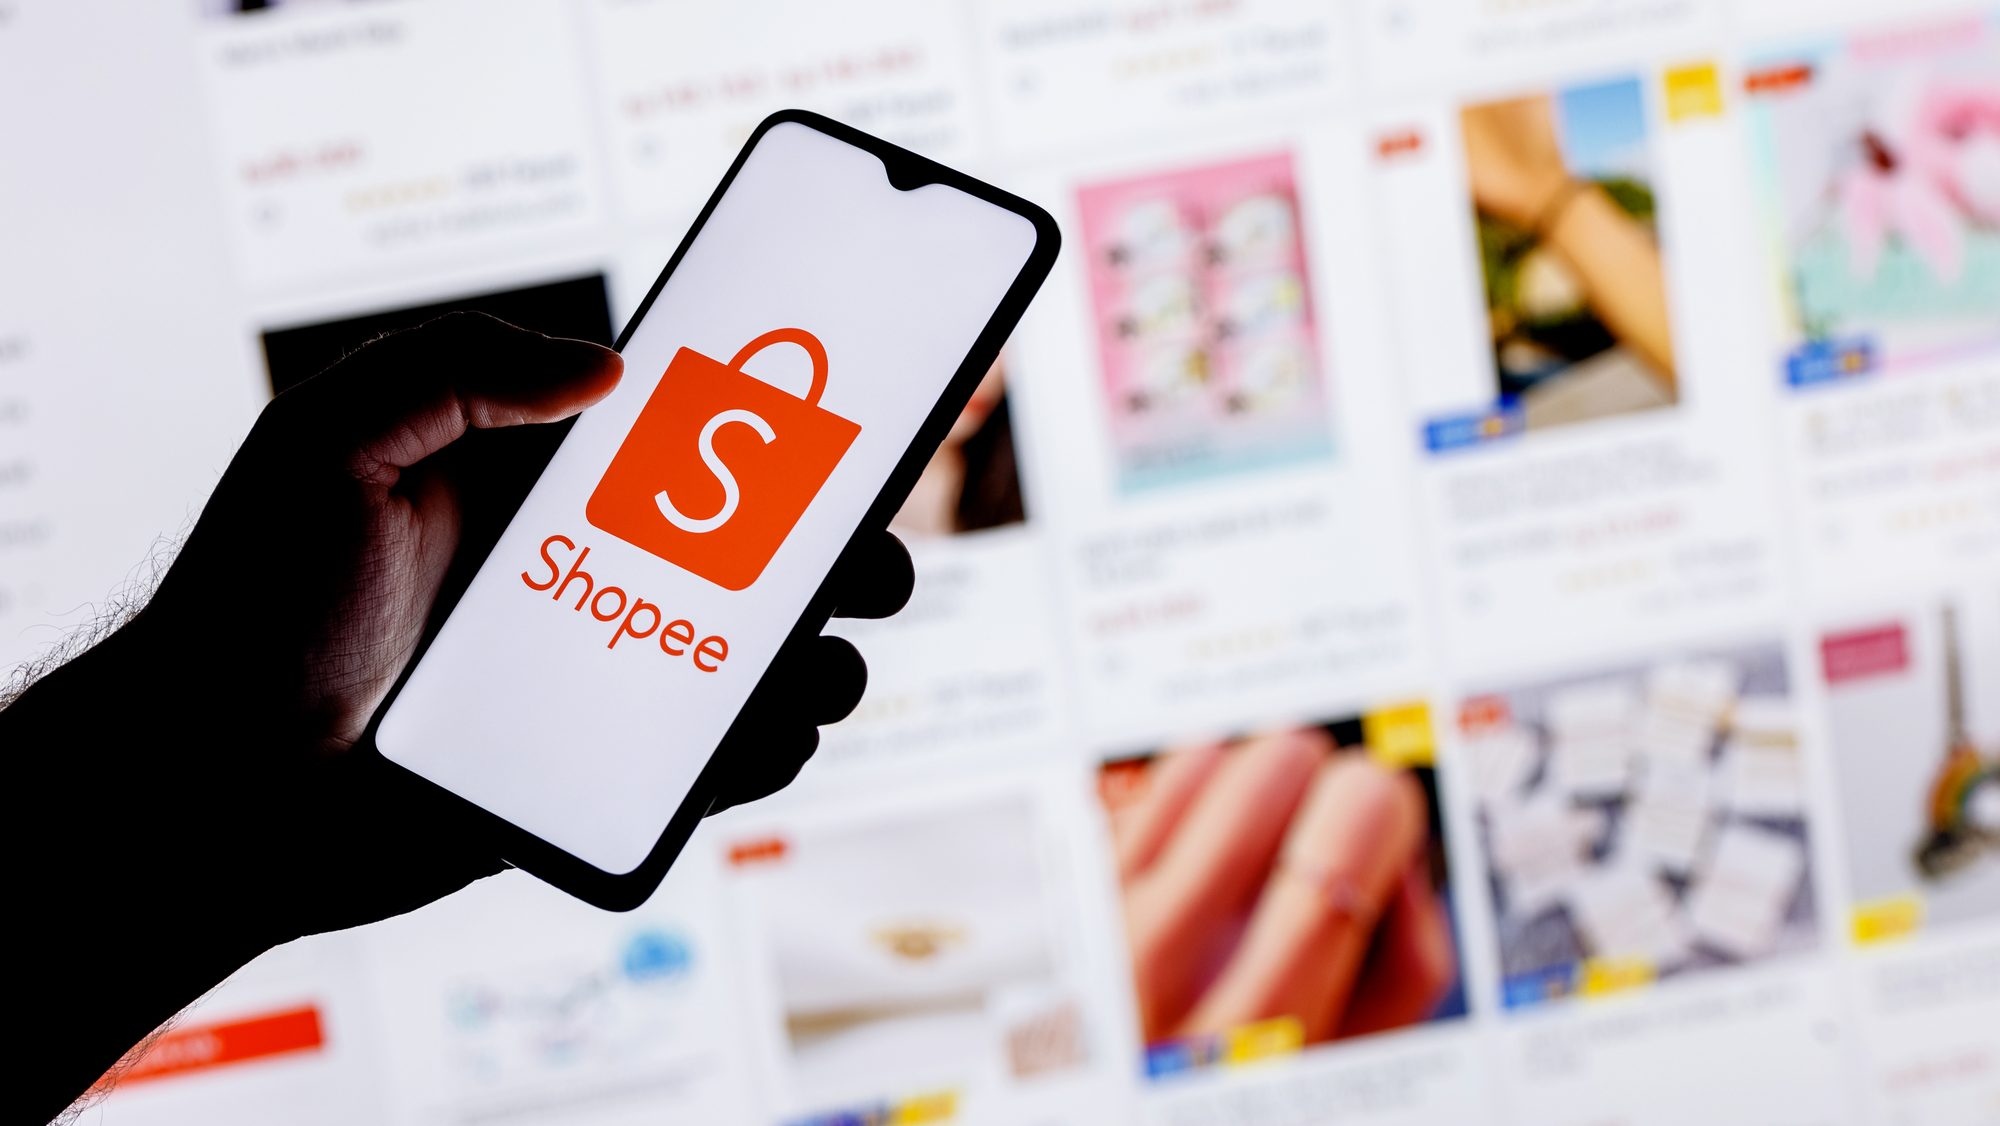 Hand holding phone with Shopee logo on screen.